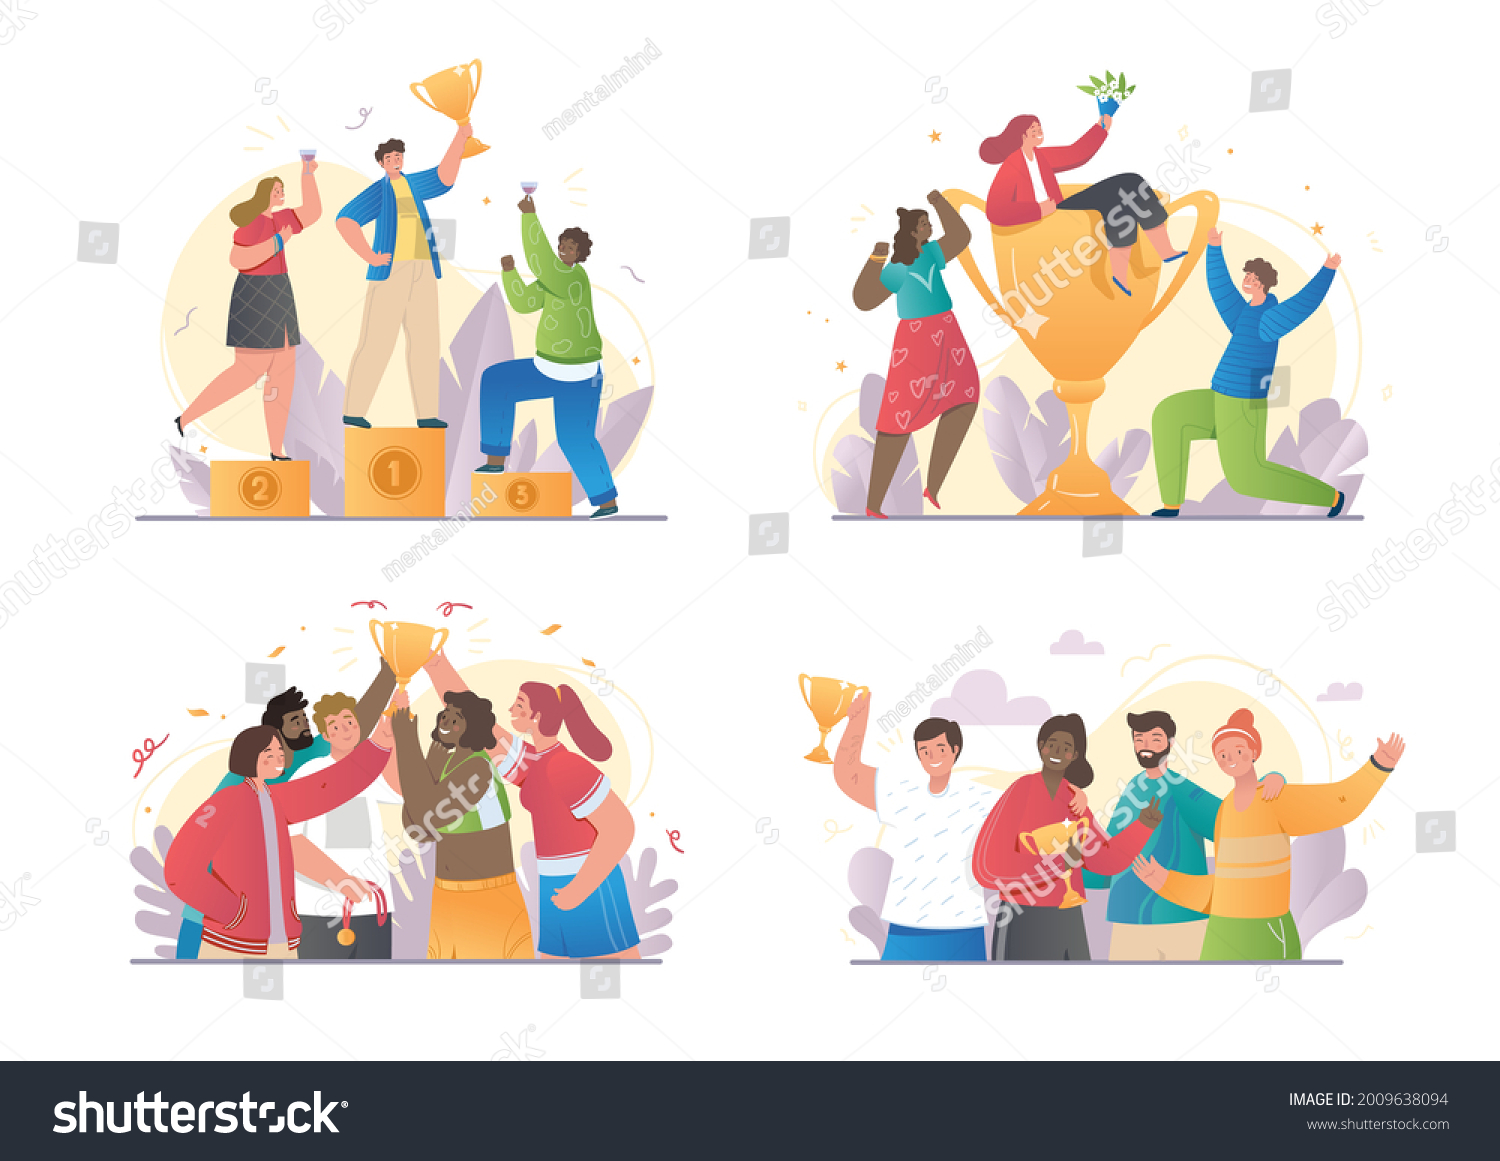 SVG of Collection of four different Happy Competition scenes with winners and trophies celebrating with diverse friends or team mates, set of isolated on white background colored vector illustrations svg